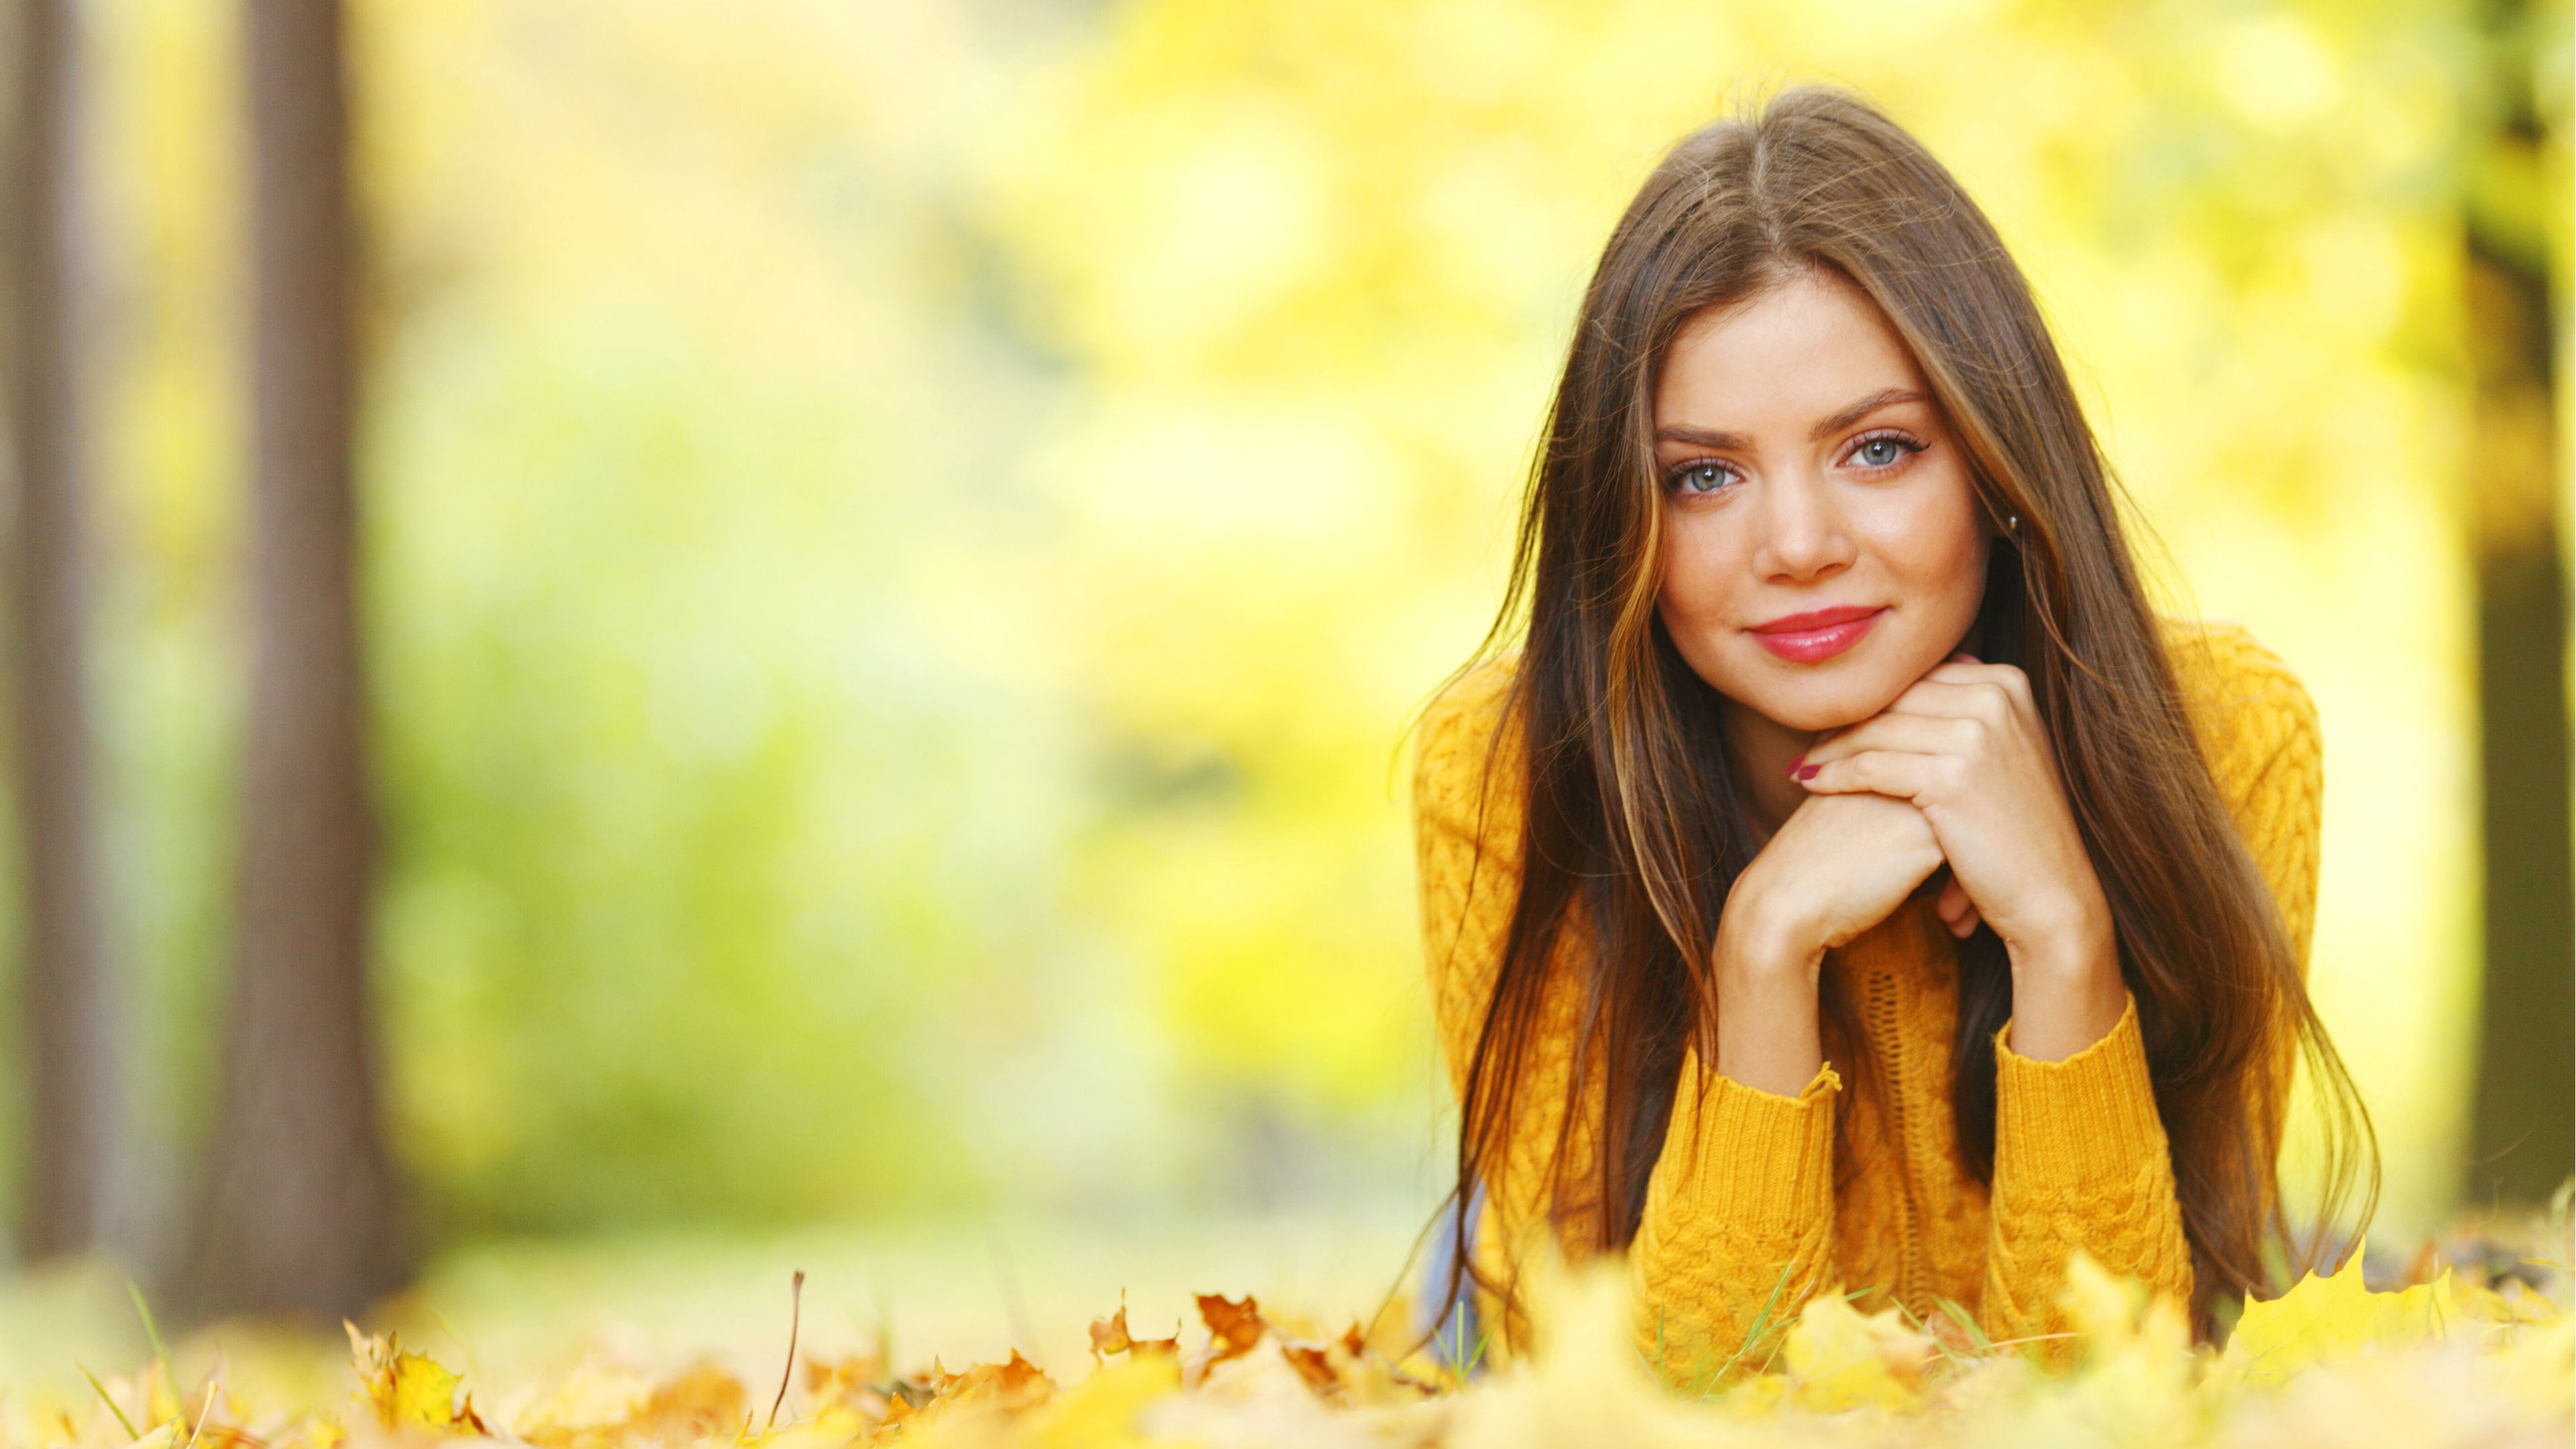 People 3840x2160 women model brunette long hair women outdoors nature face portrait trees smiling blue eyes red lipstick sweater leaves fall depth of field lying on front looking at viewer yellow sweater yellow clothing red nails